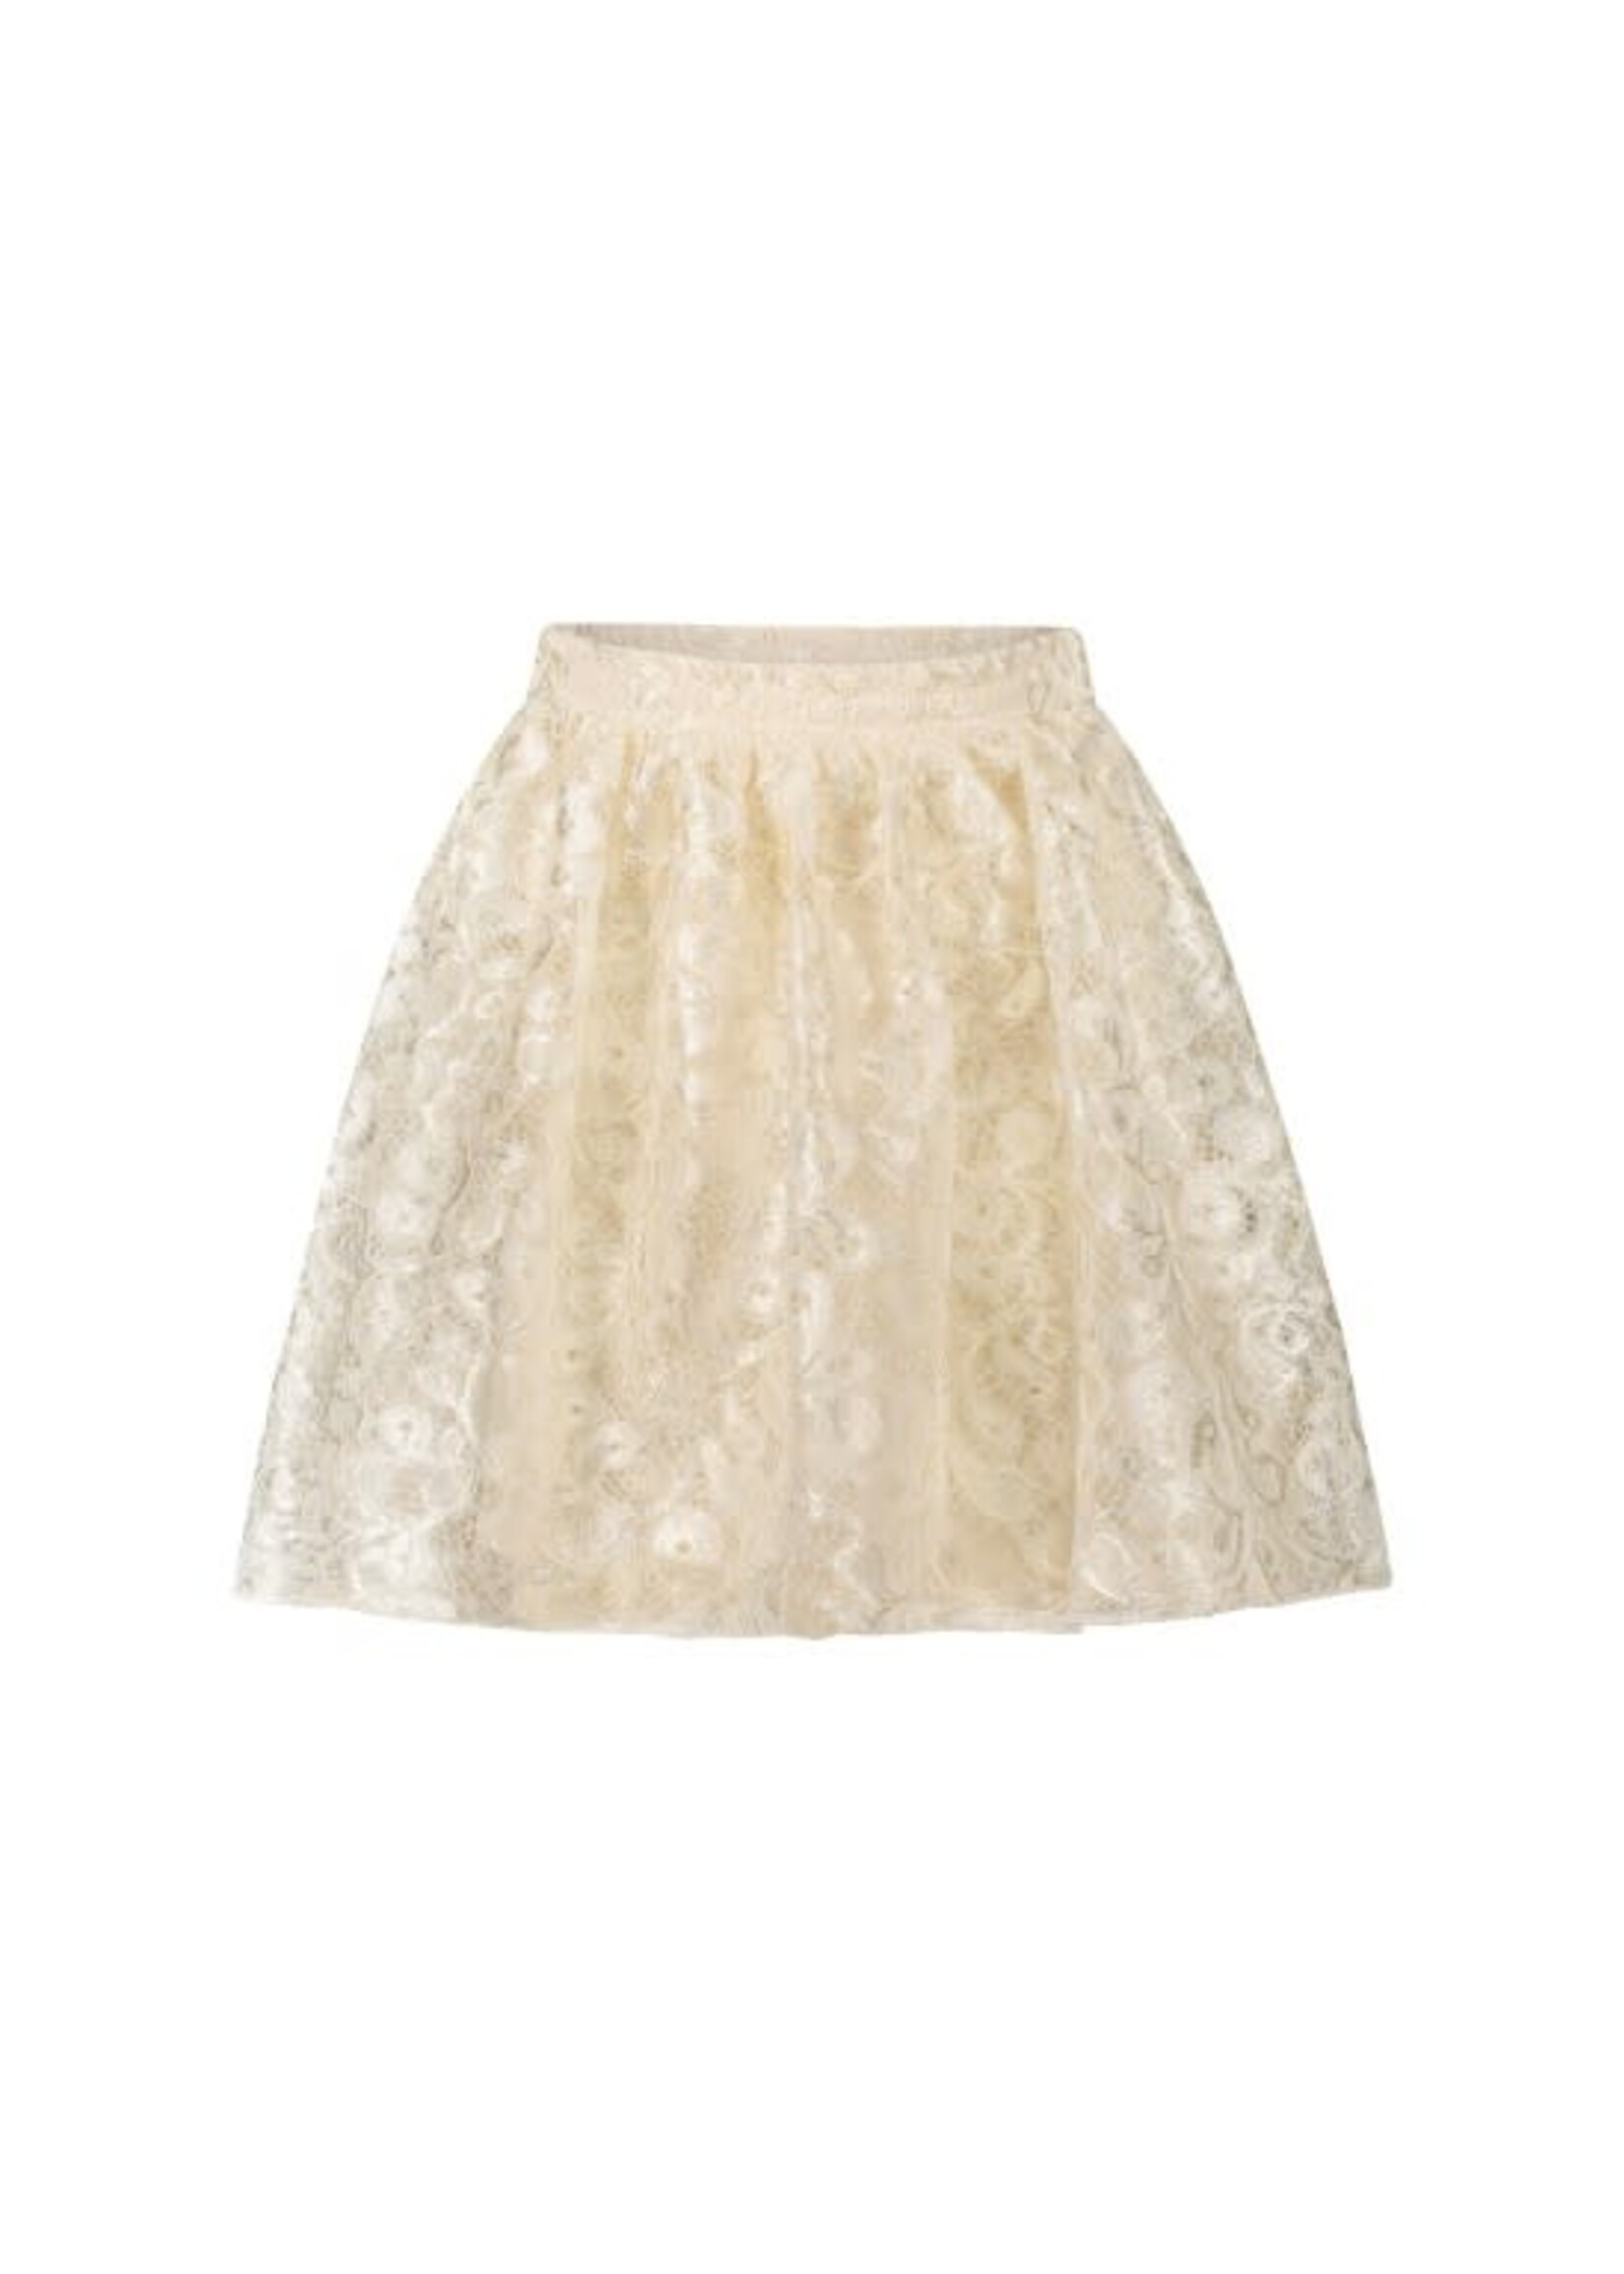 Le Chic Le Chic TRUTHY lace & pearls skirt C312-5708 Oatmeal Elite